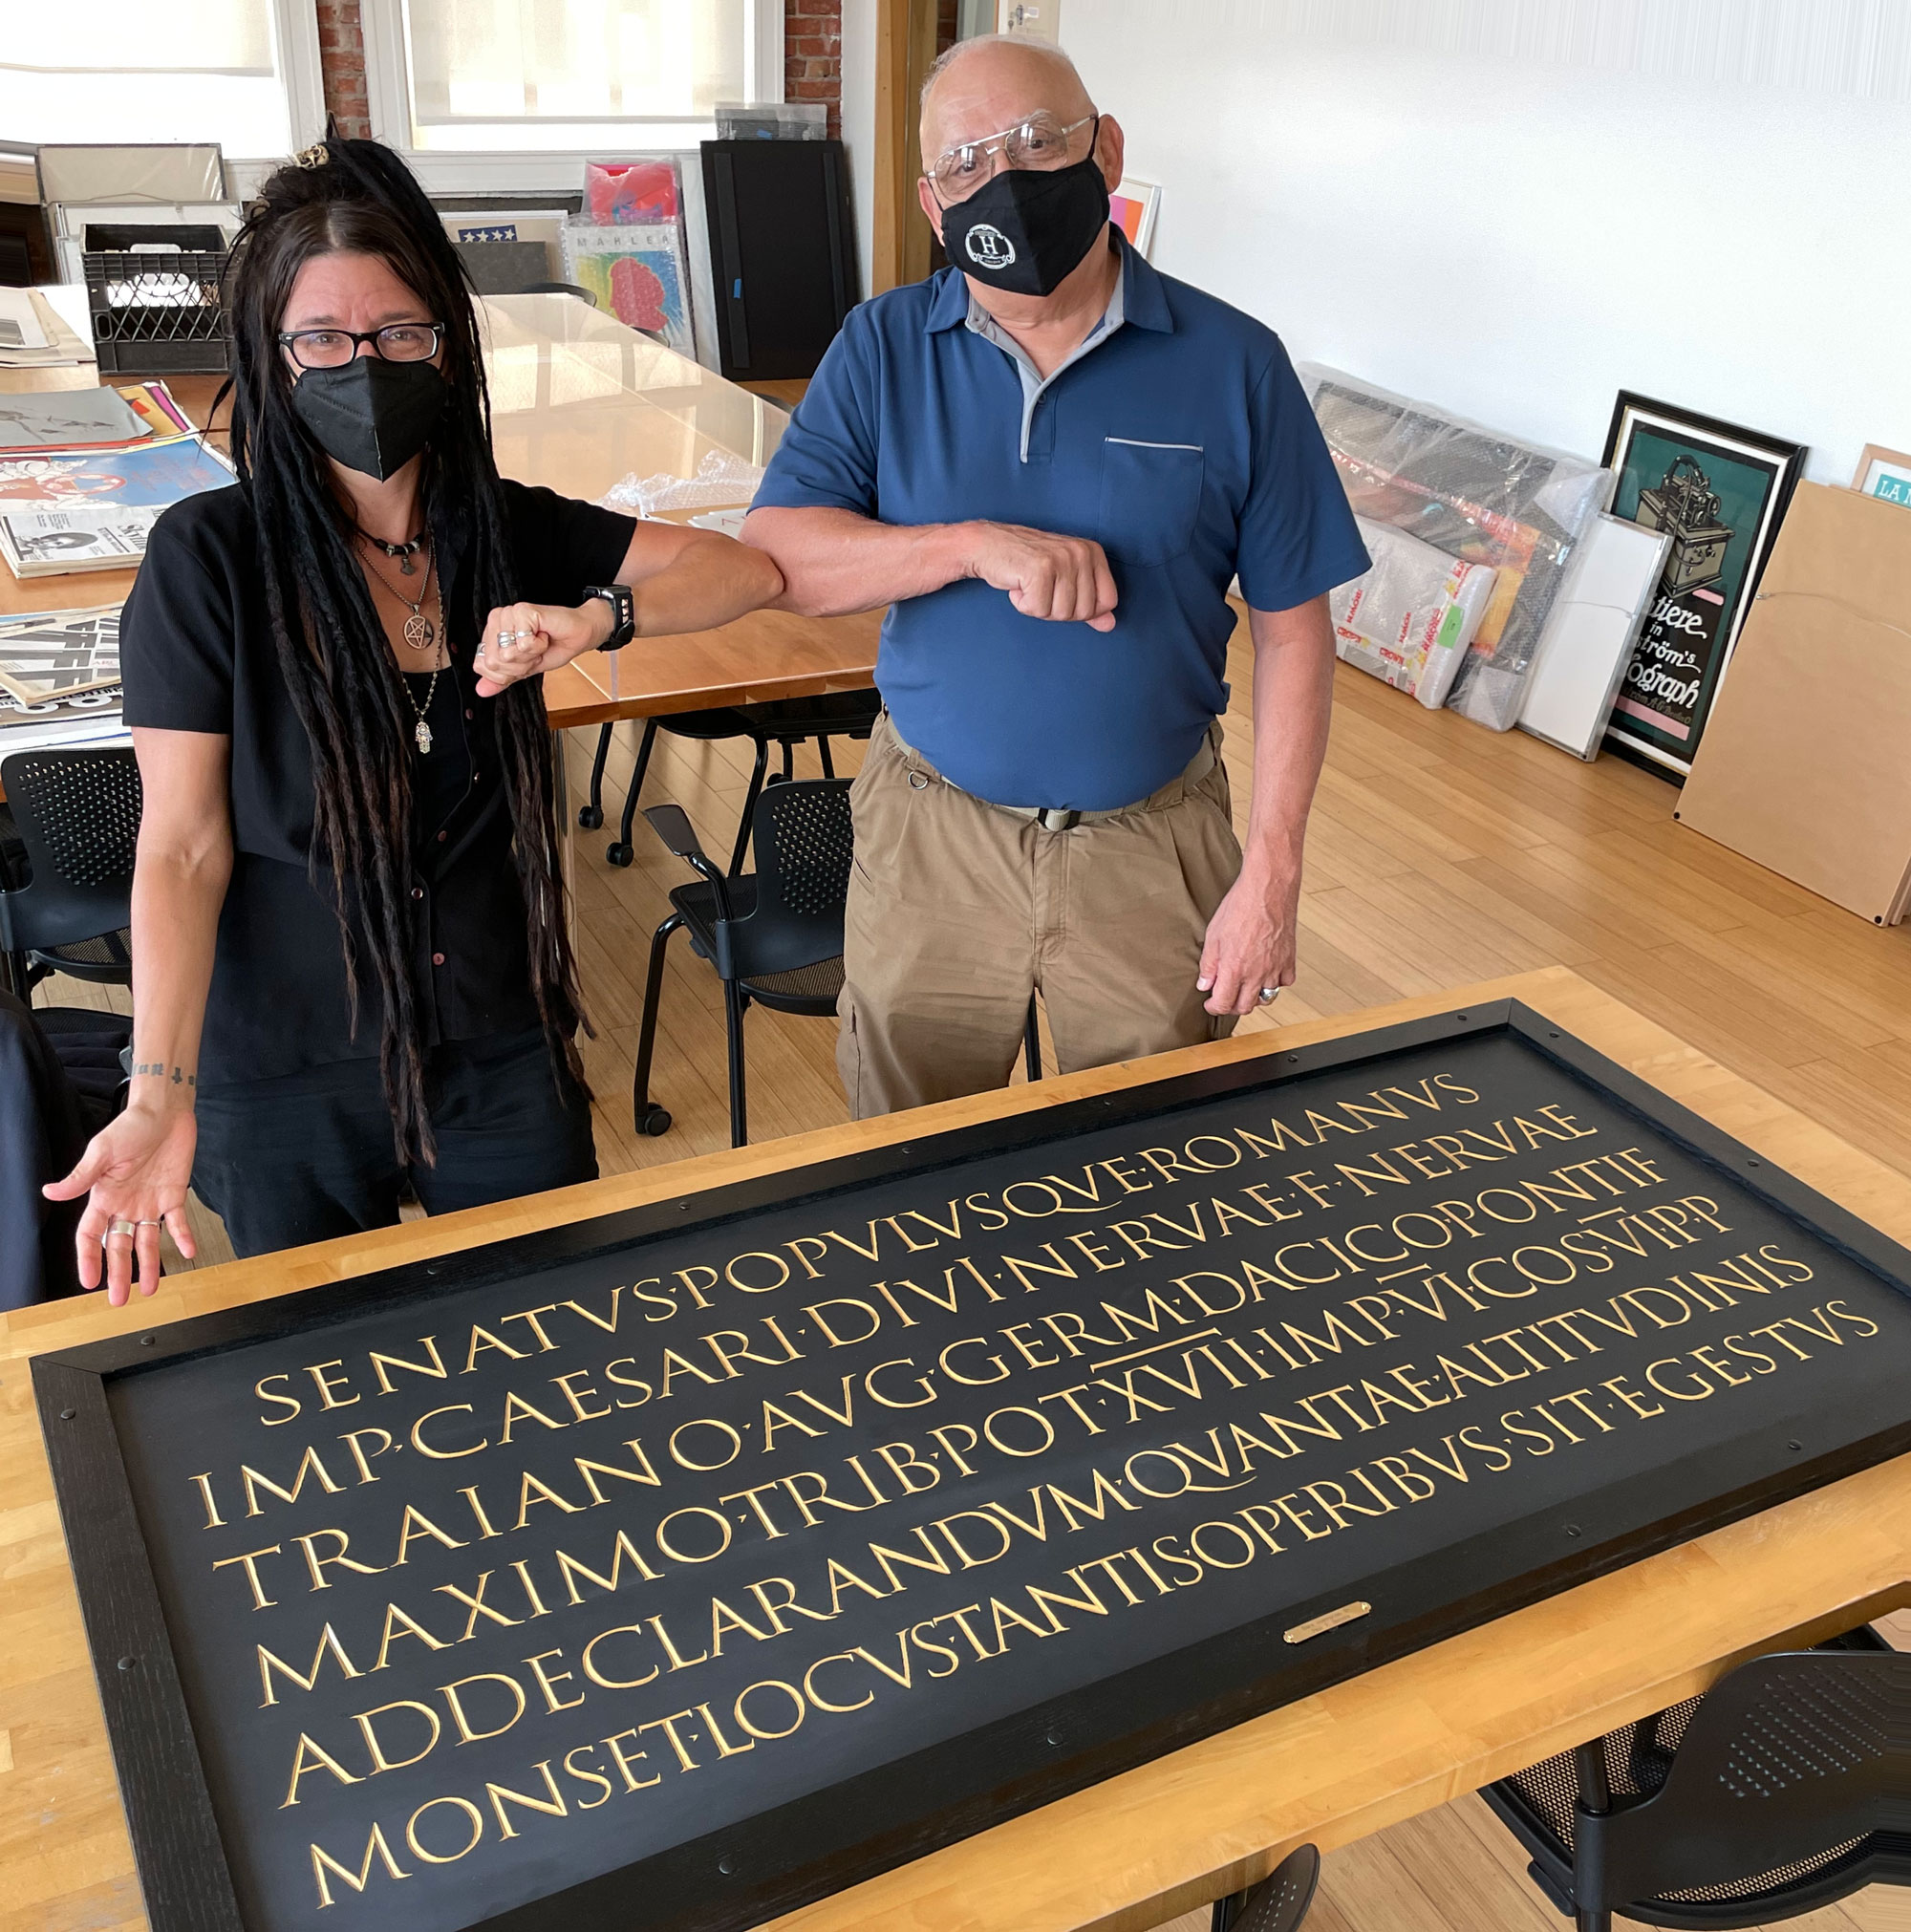 Grendl Löfkvist and Paul Herrera in the classroom at Letterform Archive.